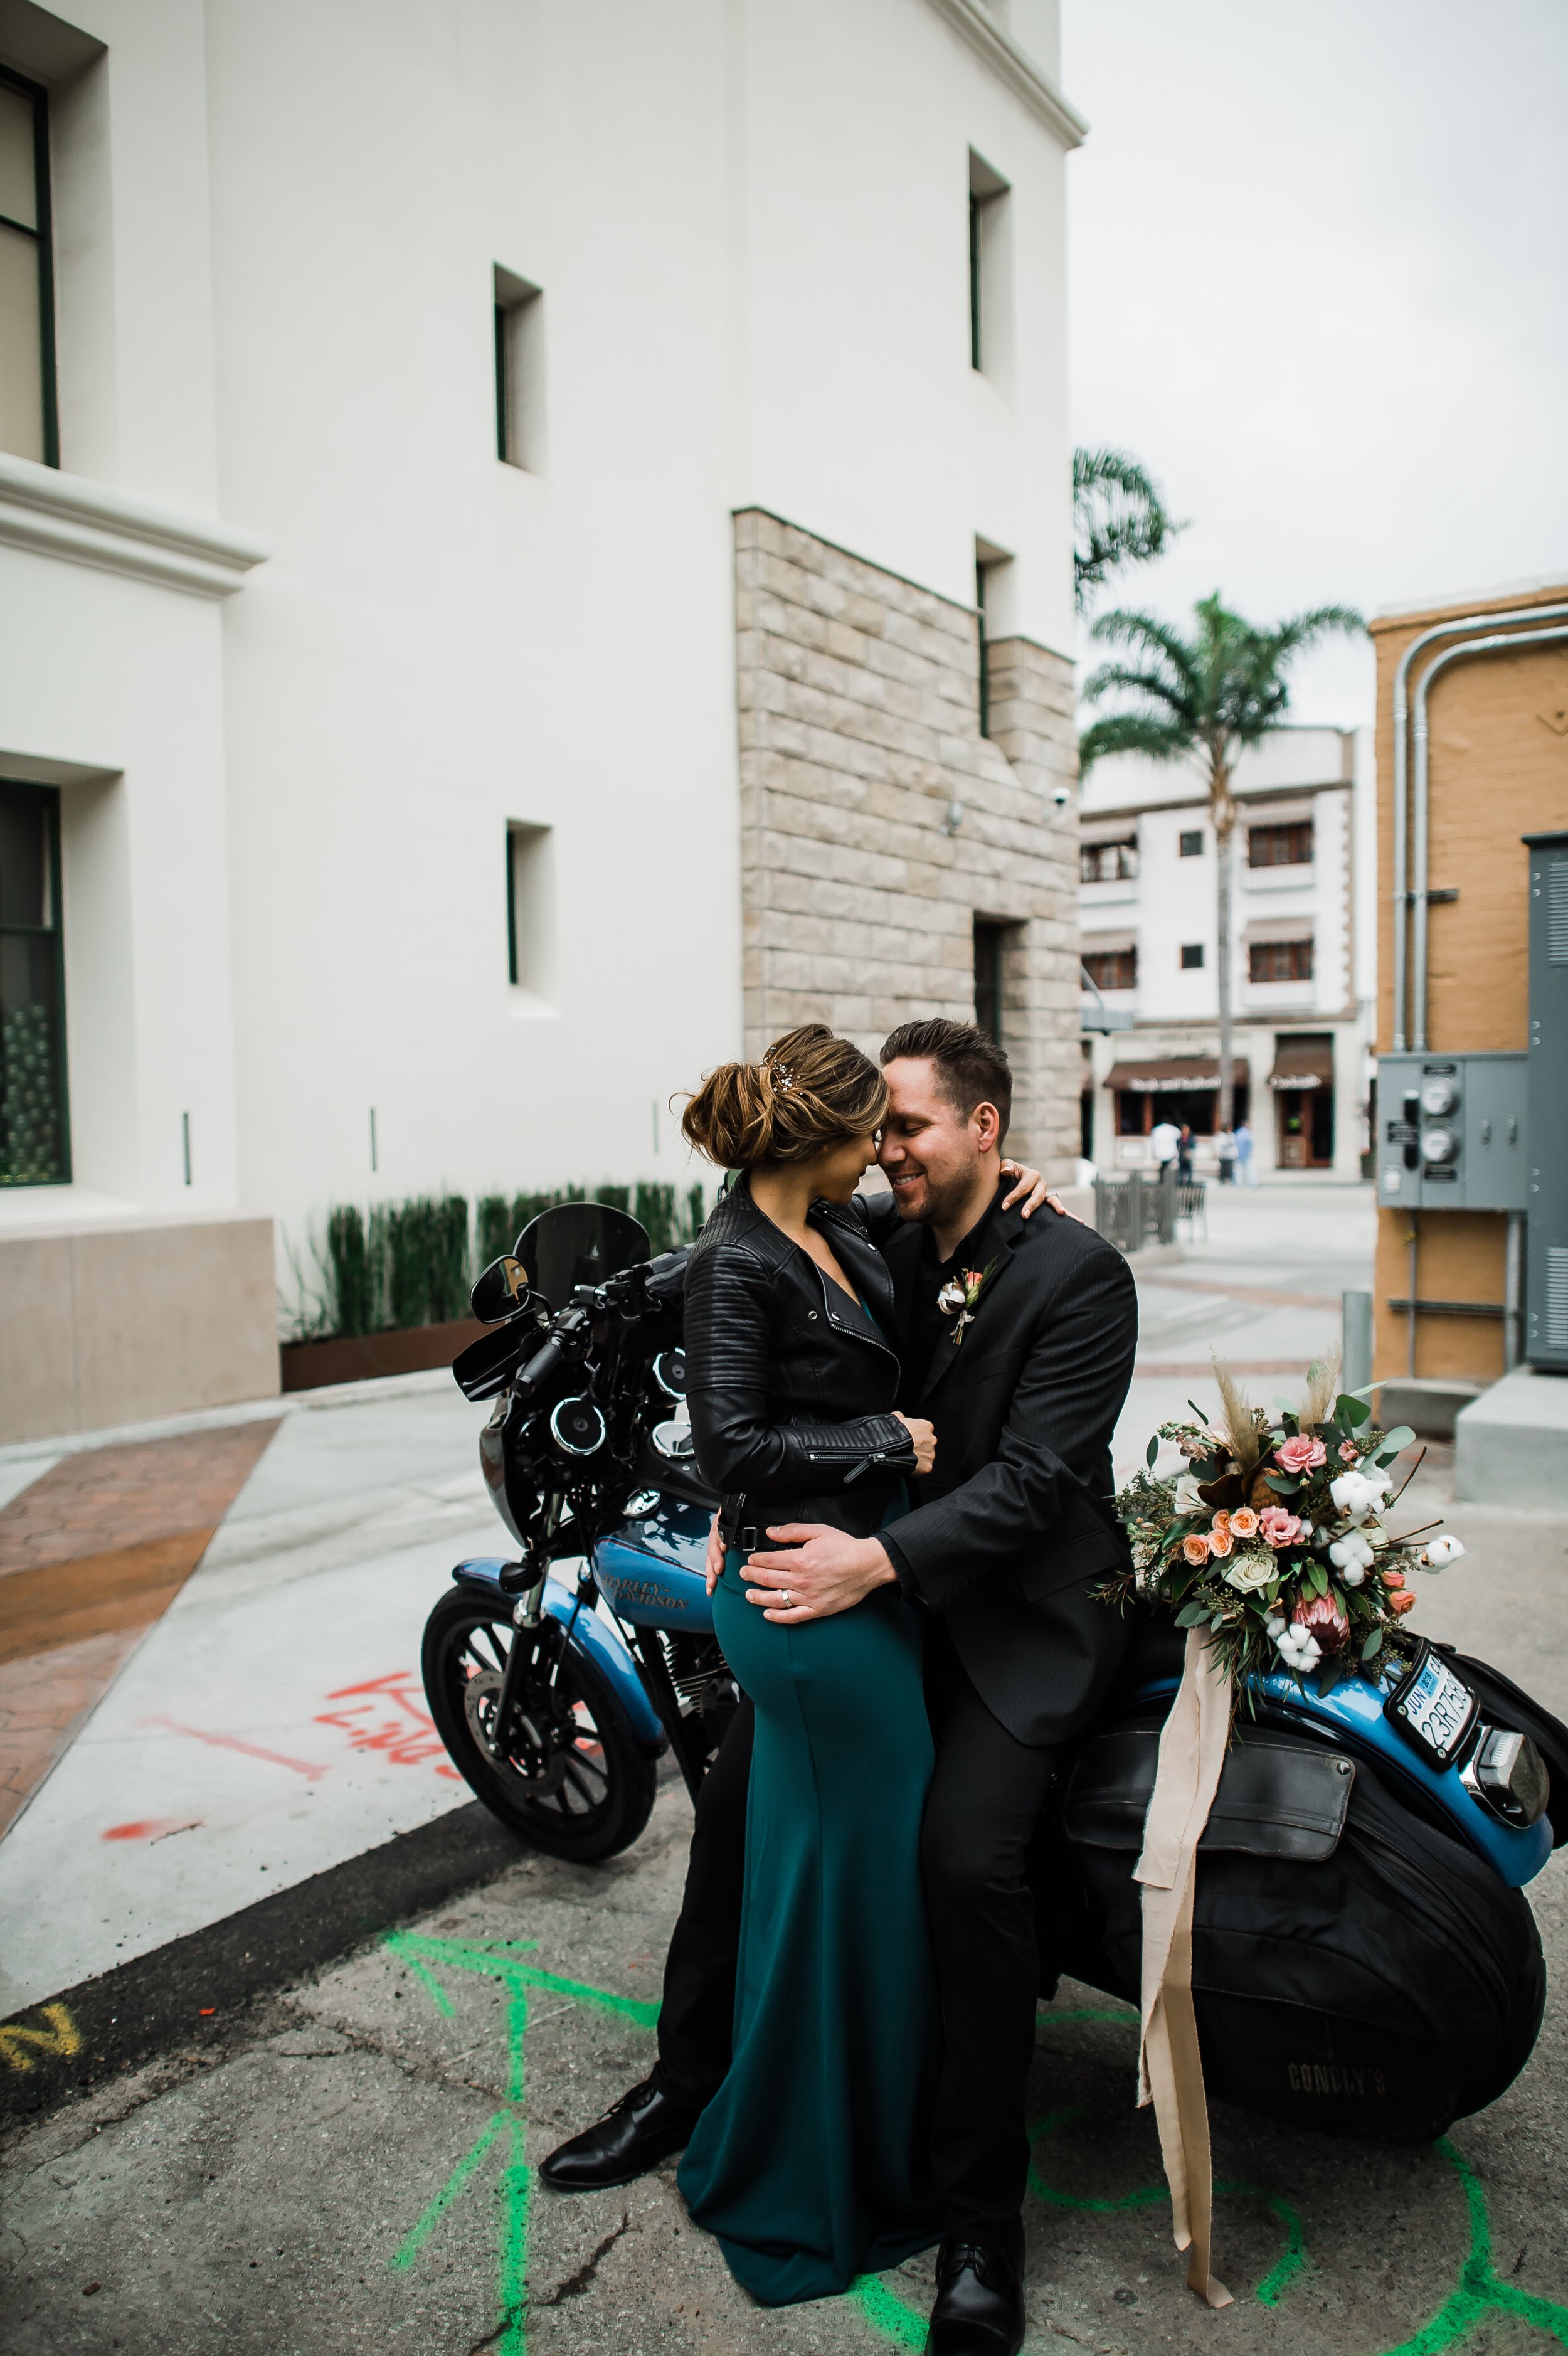 www.santabarbarawedding.com | Cafe Fiore | Michelle Ramirez | Simply S Events | Tangled Lotus | Jos A. Bank | Windsor | Honey Silks Co. | Bride and Groom Kiss by a Motorcycle